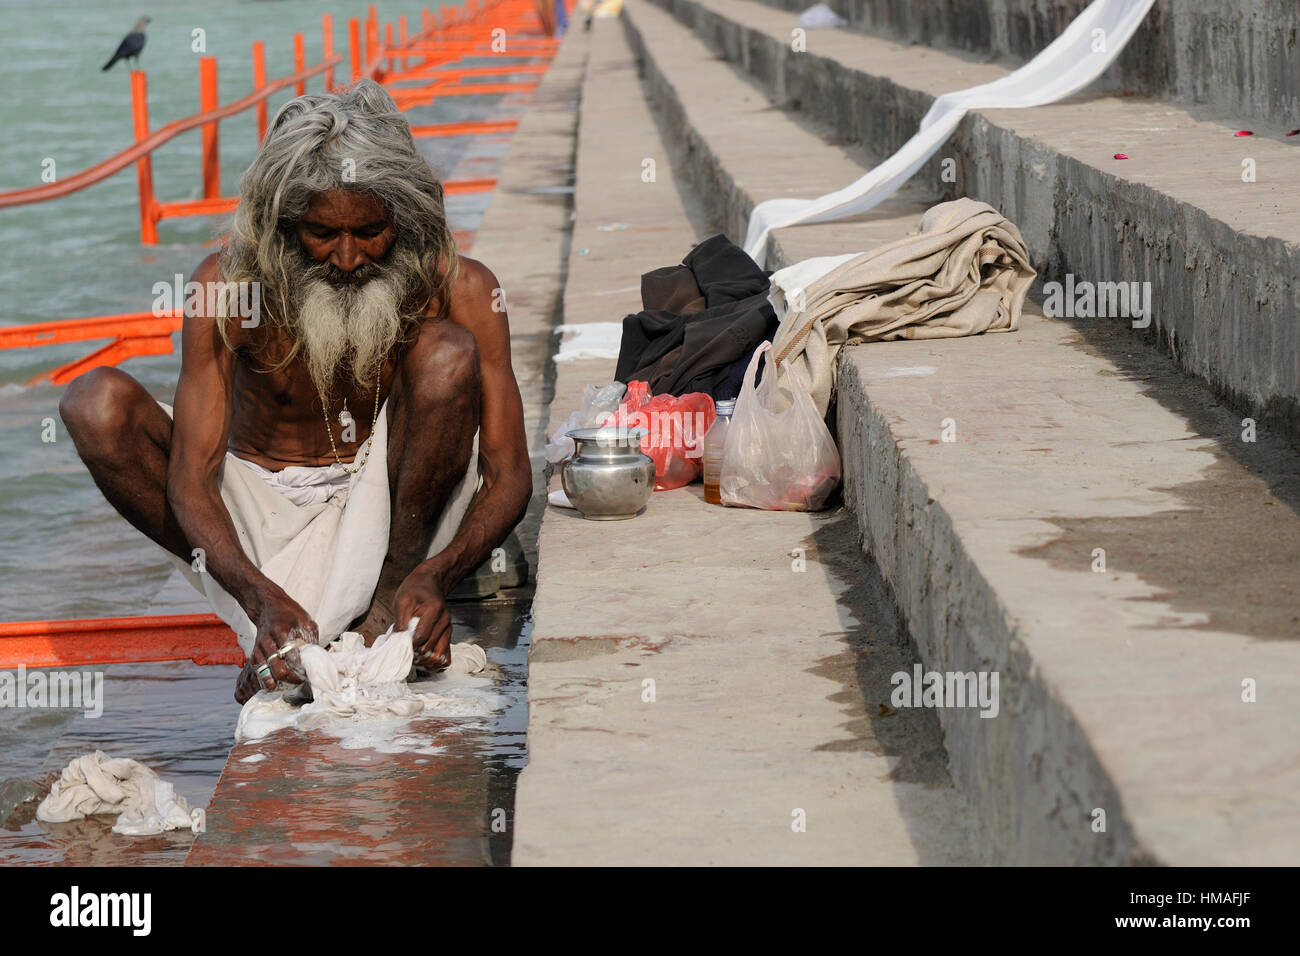 Haridwar, India - November 11, 2009: Indians pilgrim doing the washing above the bank of the Ganges River in the holy city Haridwar, November 11, 2009 Stock Photo